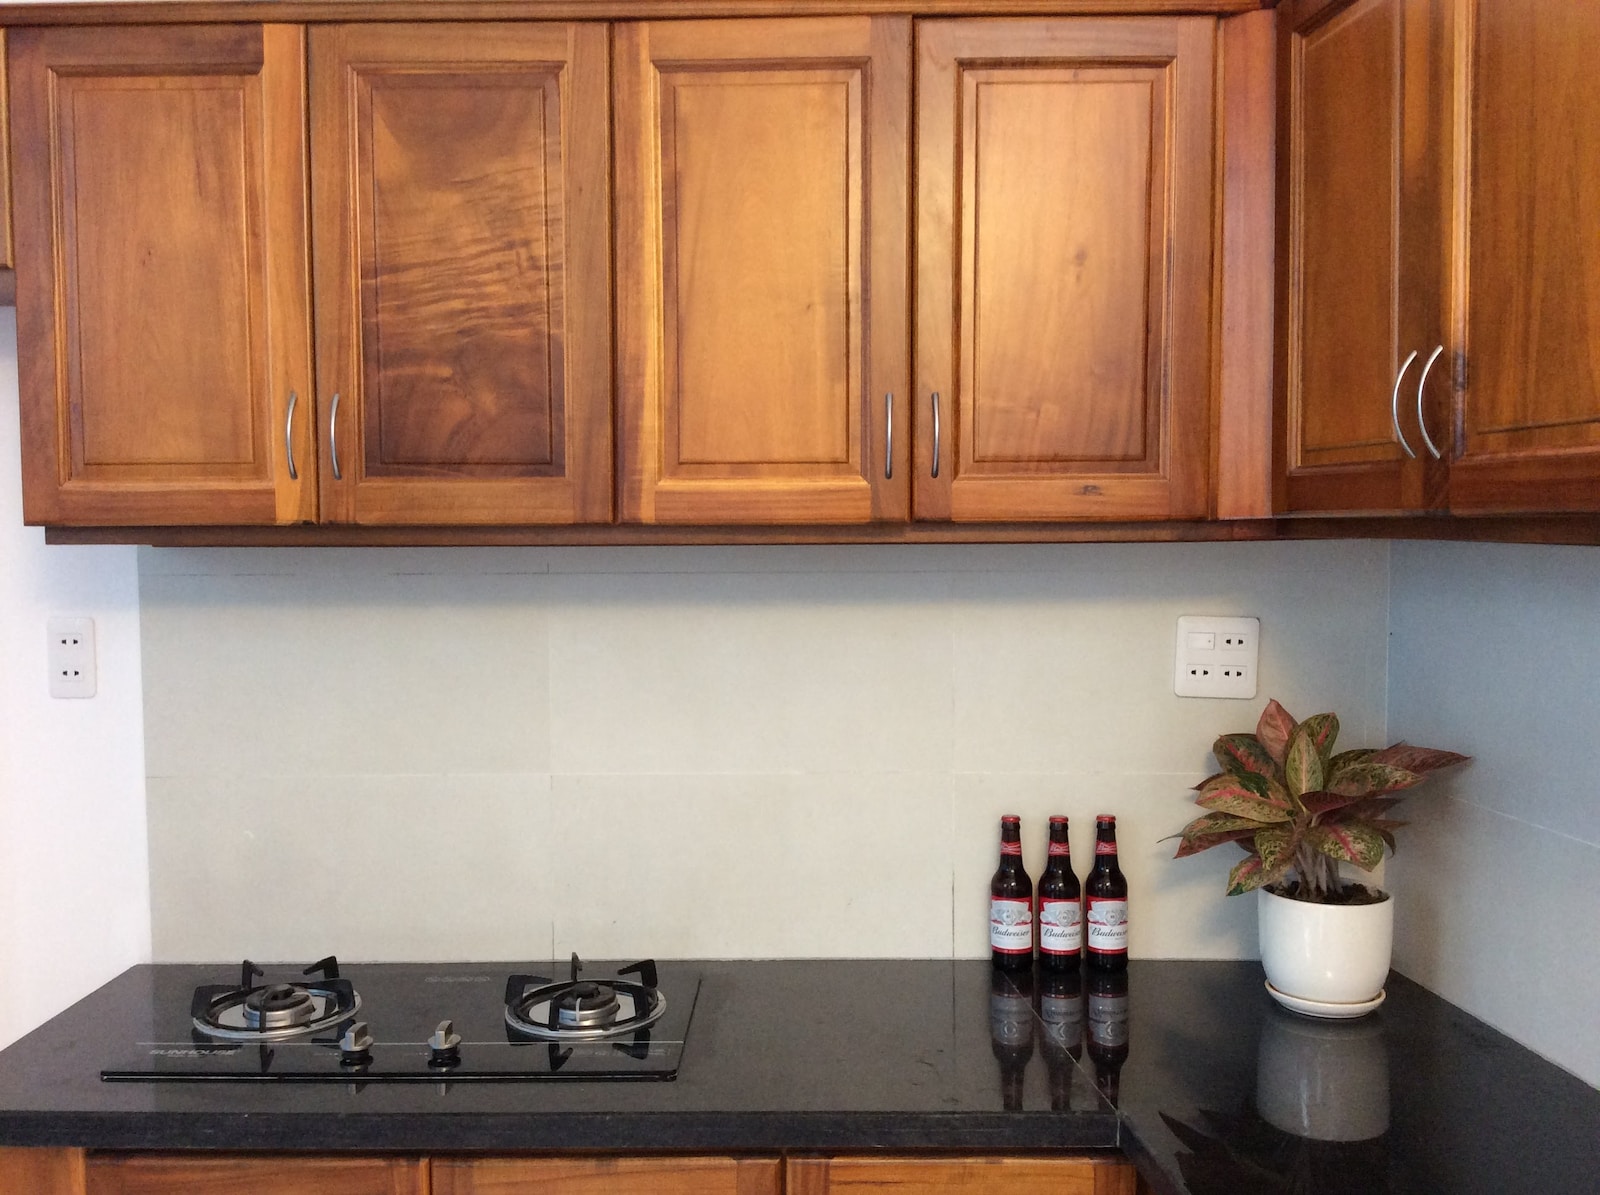 How to Clean and Maintain Kitchen Cabinets: Expert Advice